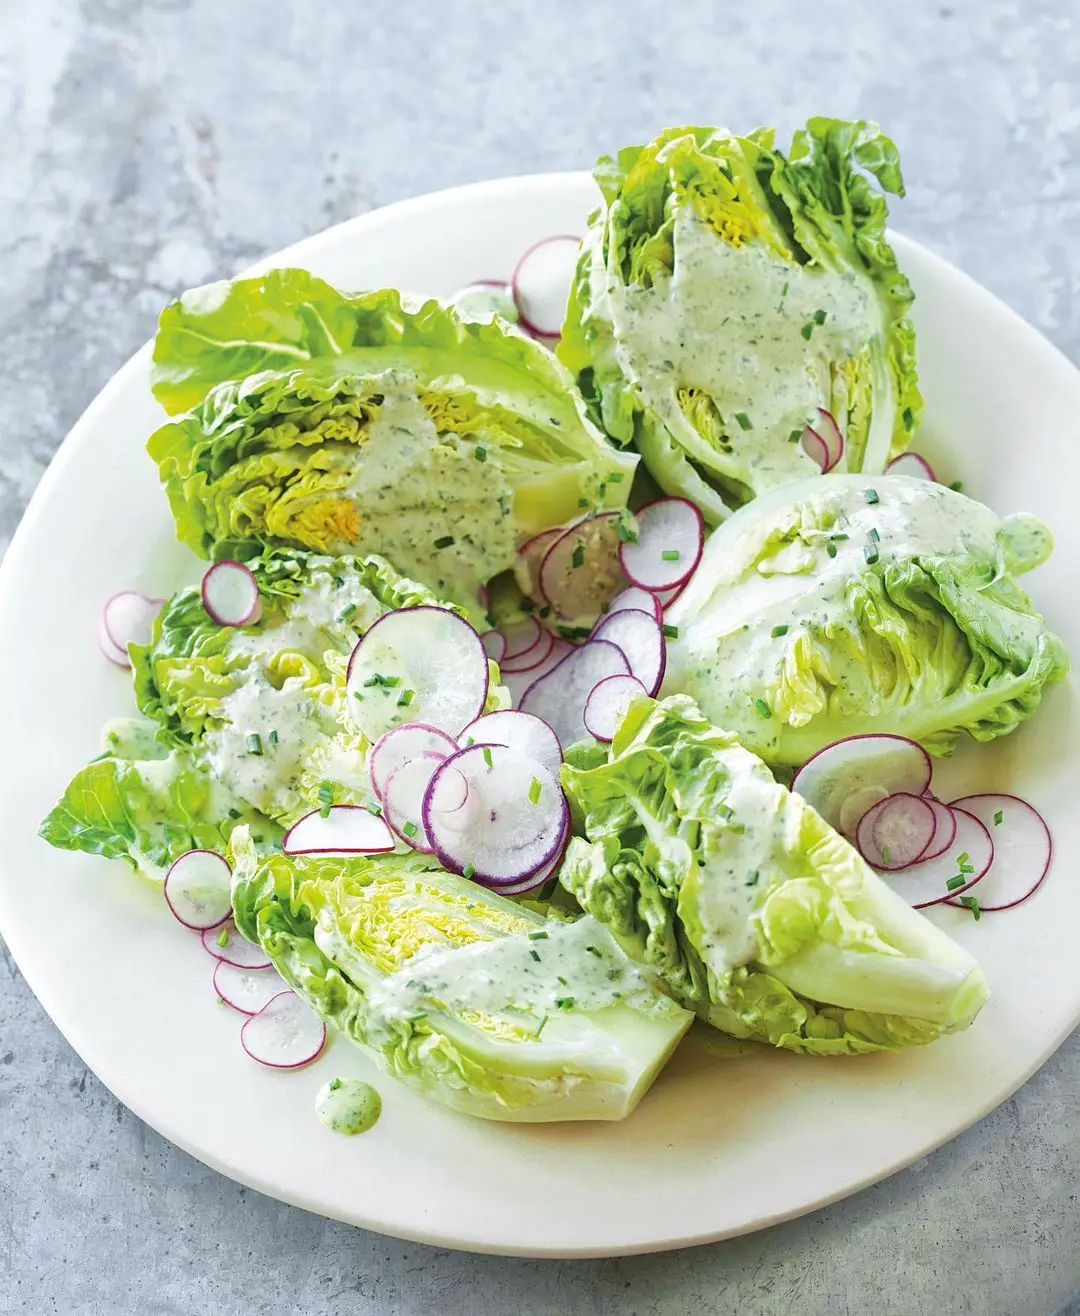 25 Salad Dressings  You Definitely Need to Make at Home ...